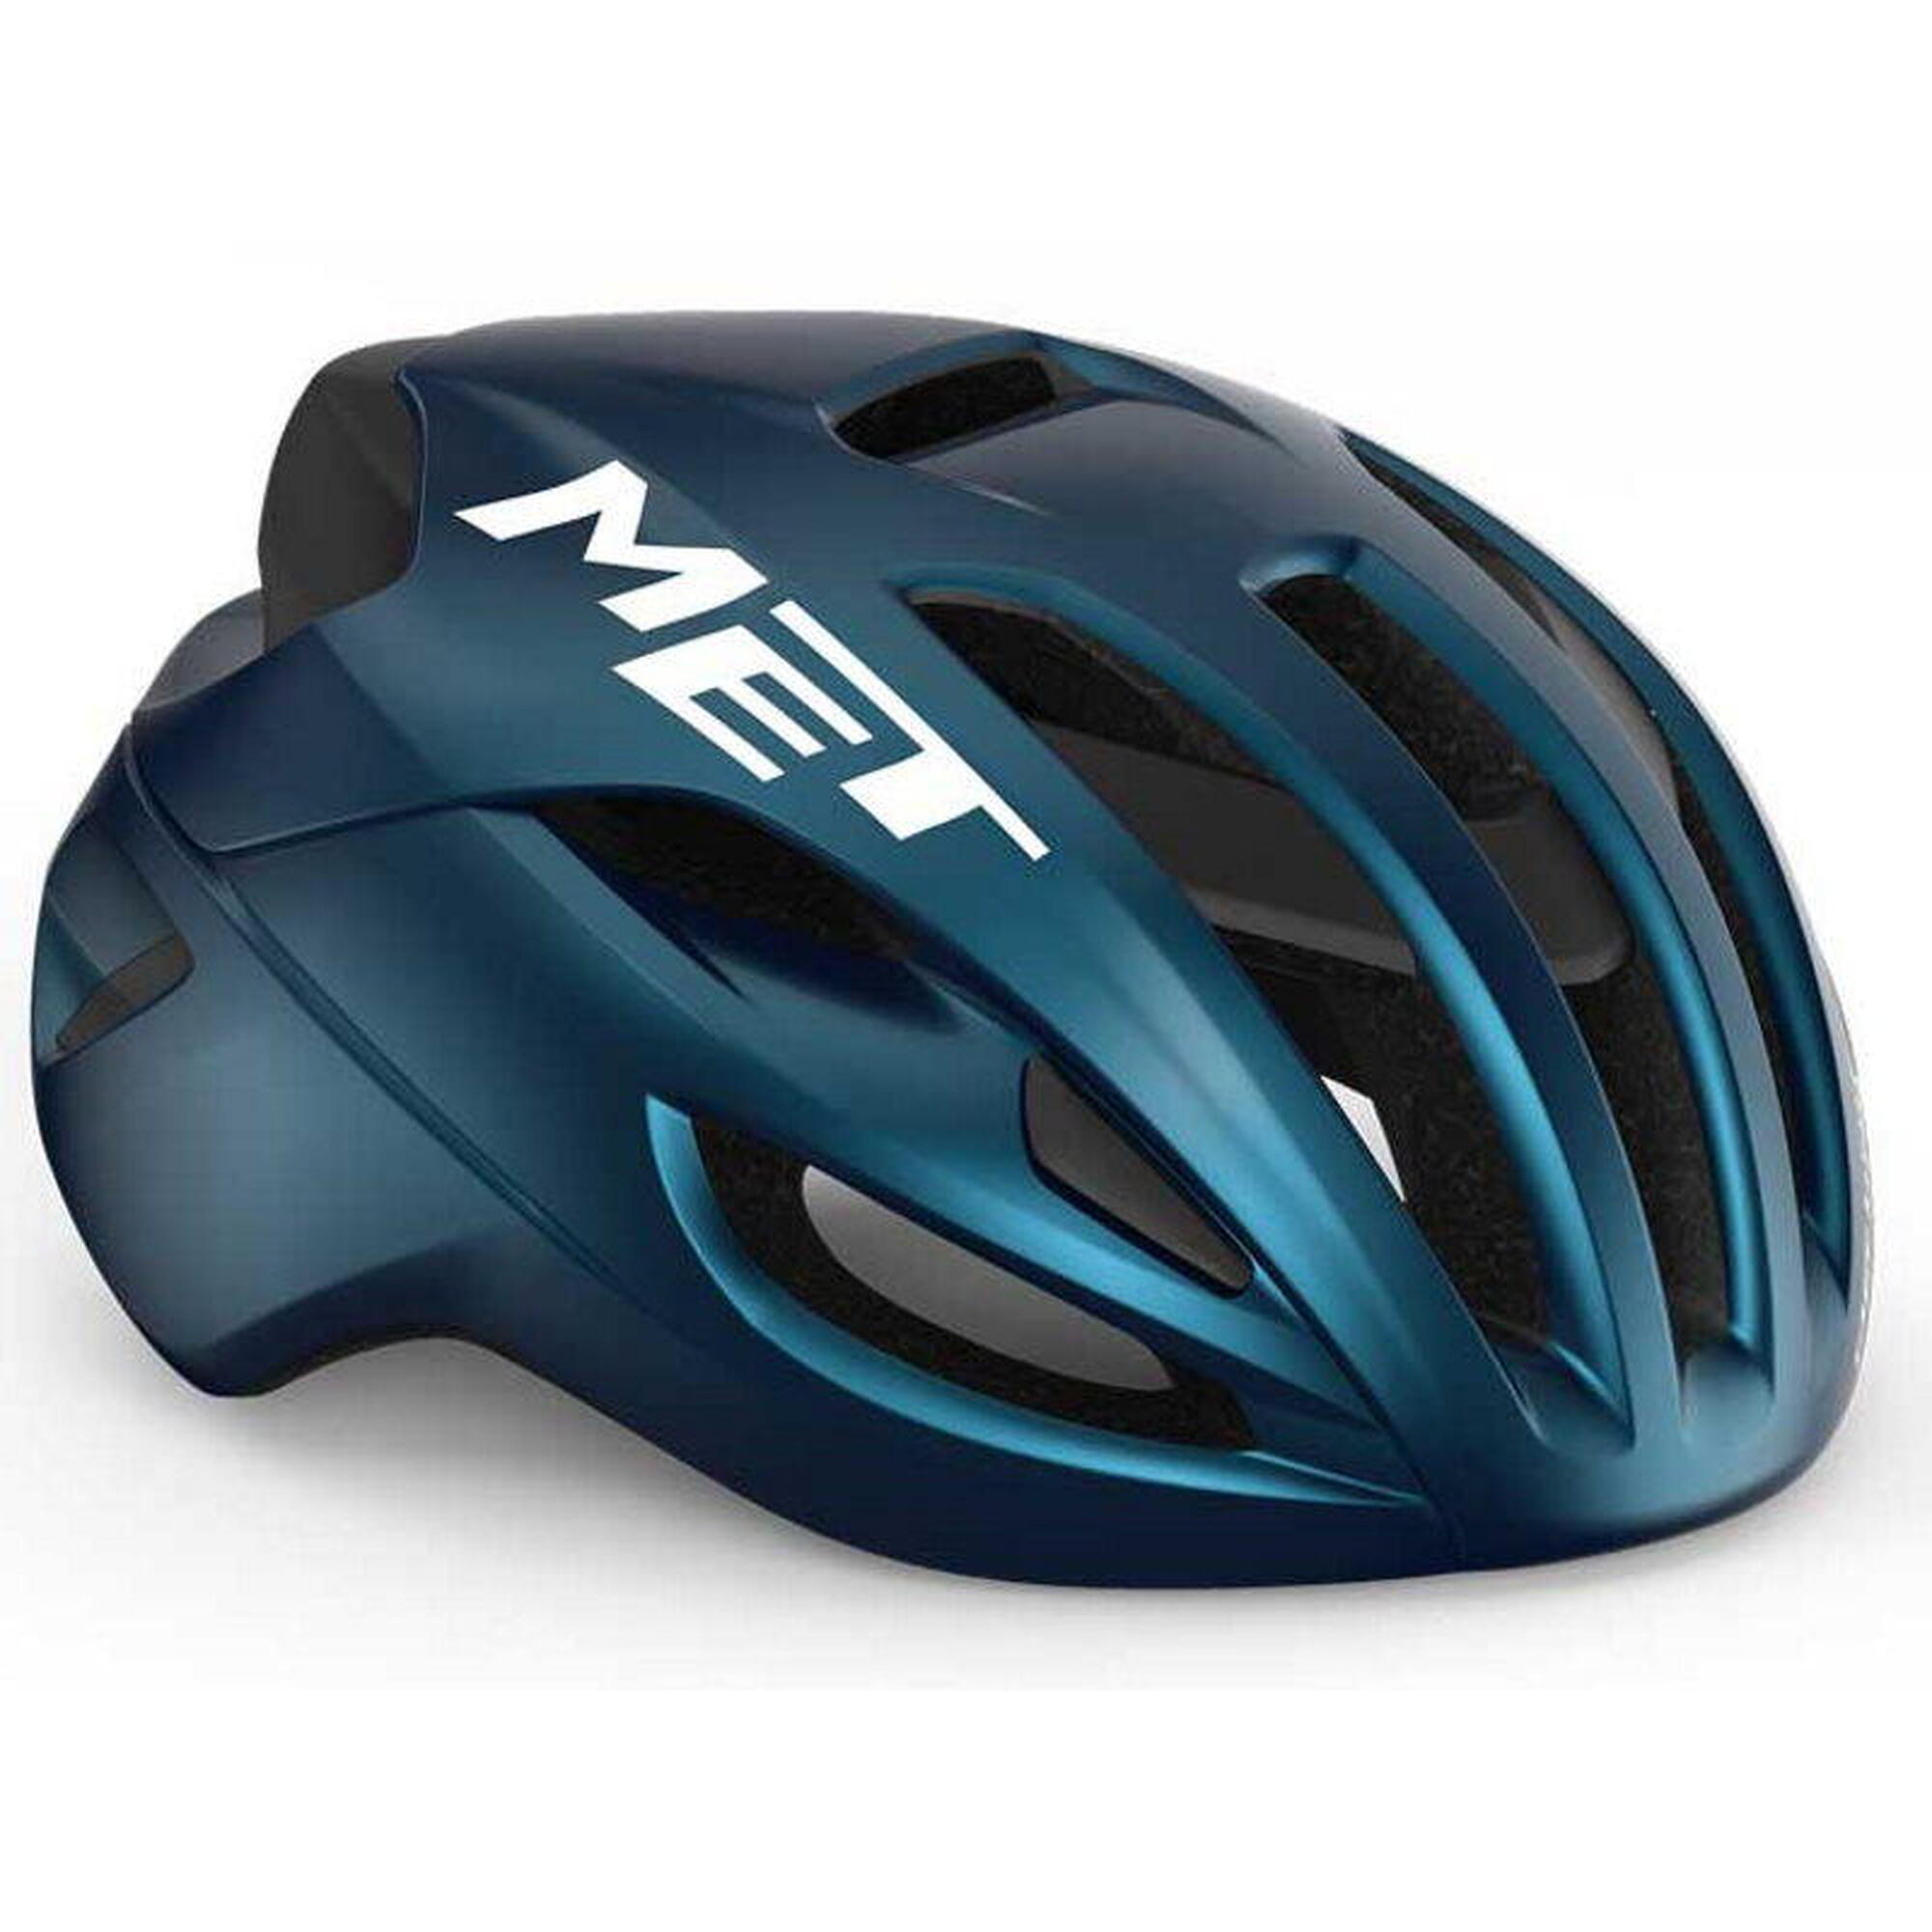 MET Casque cycliste Rivale Mips